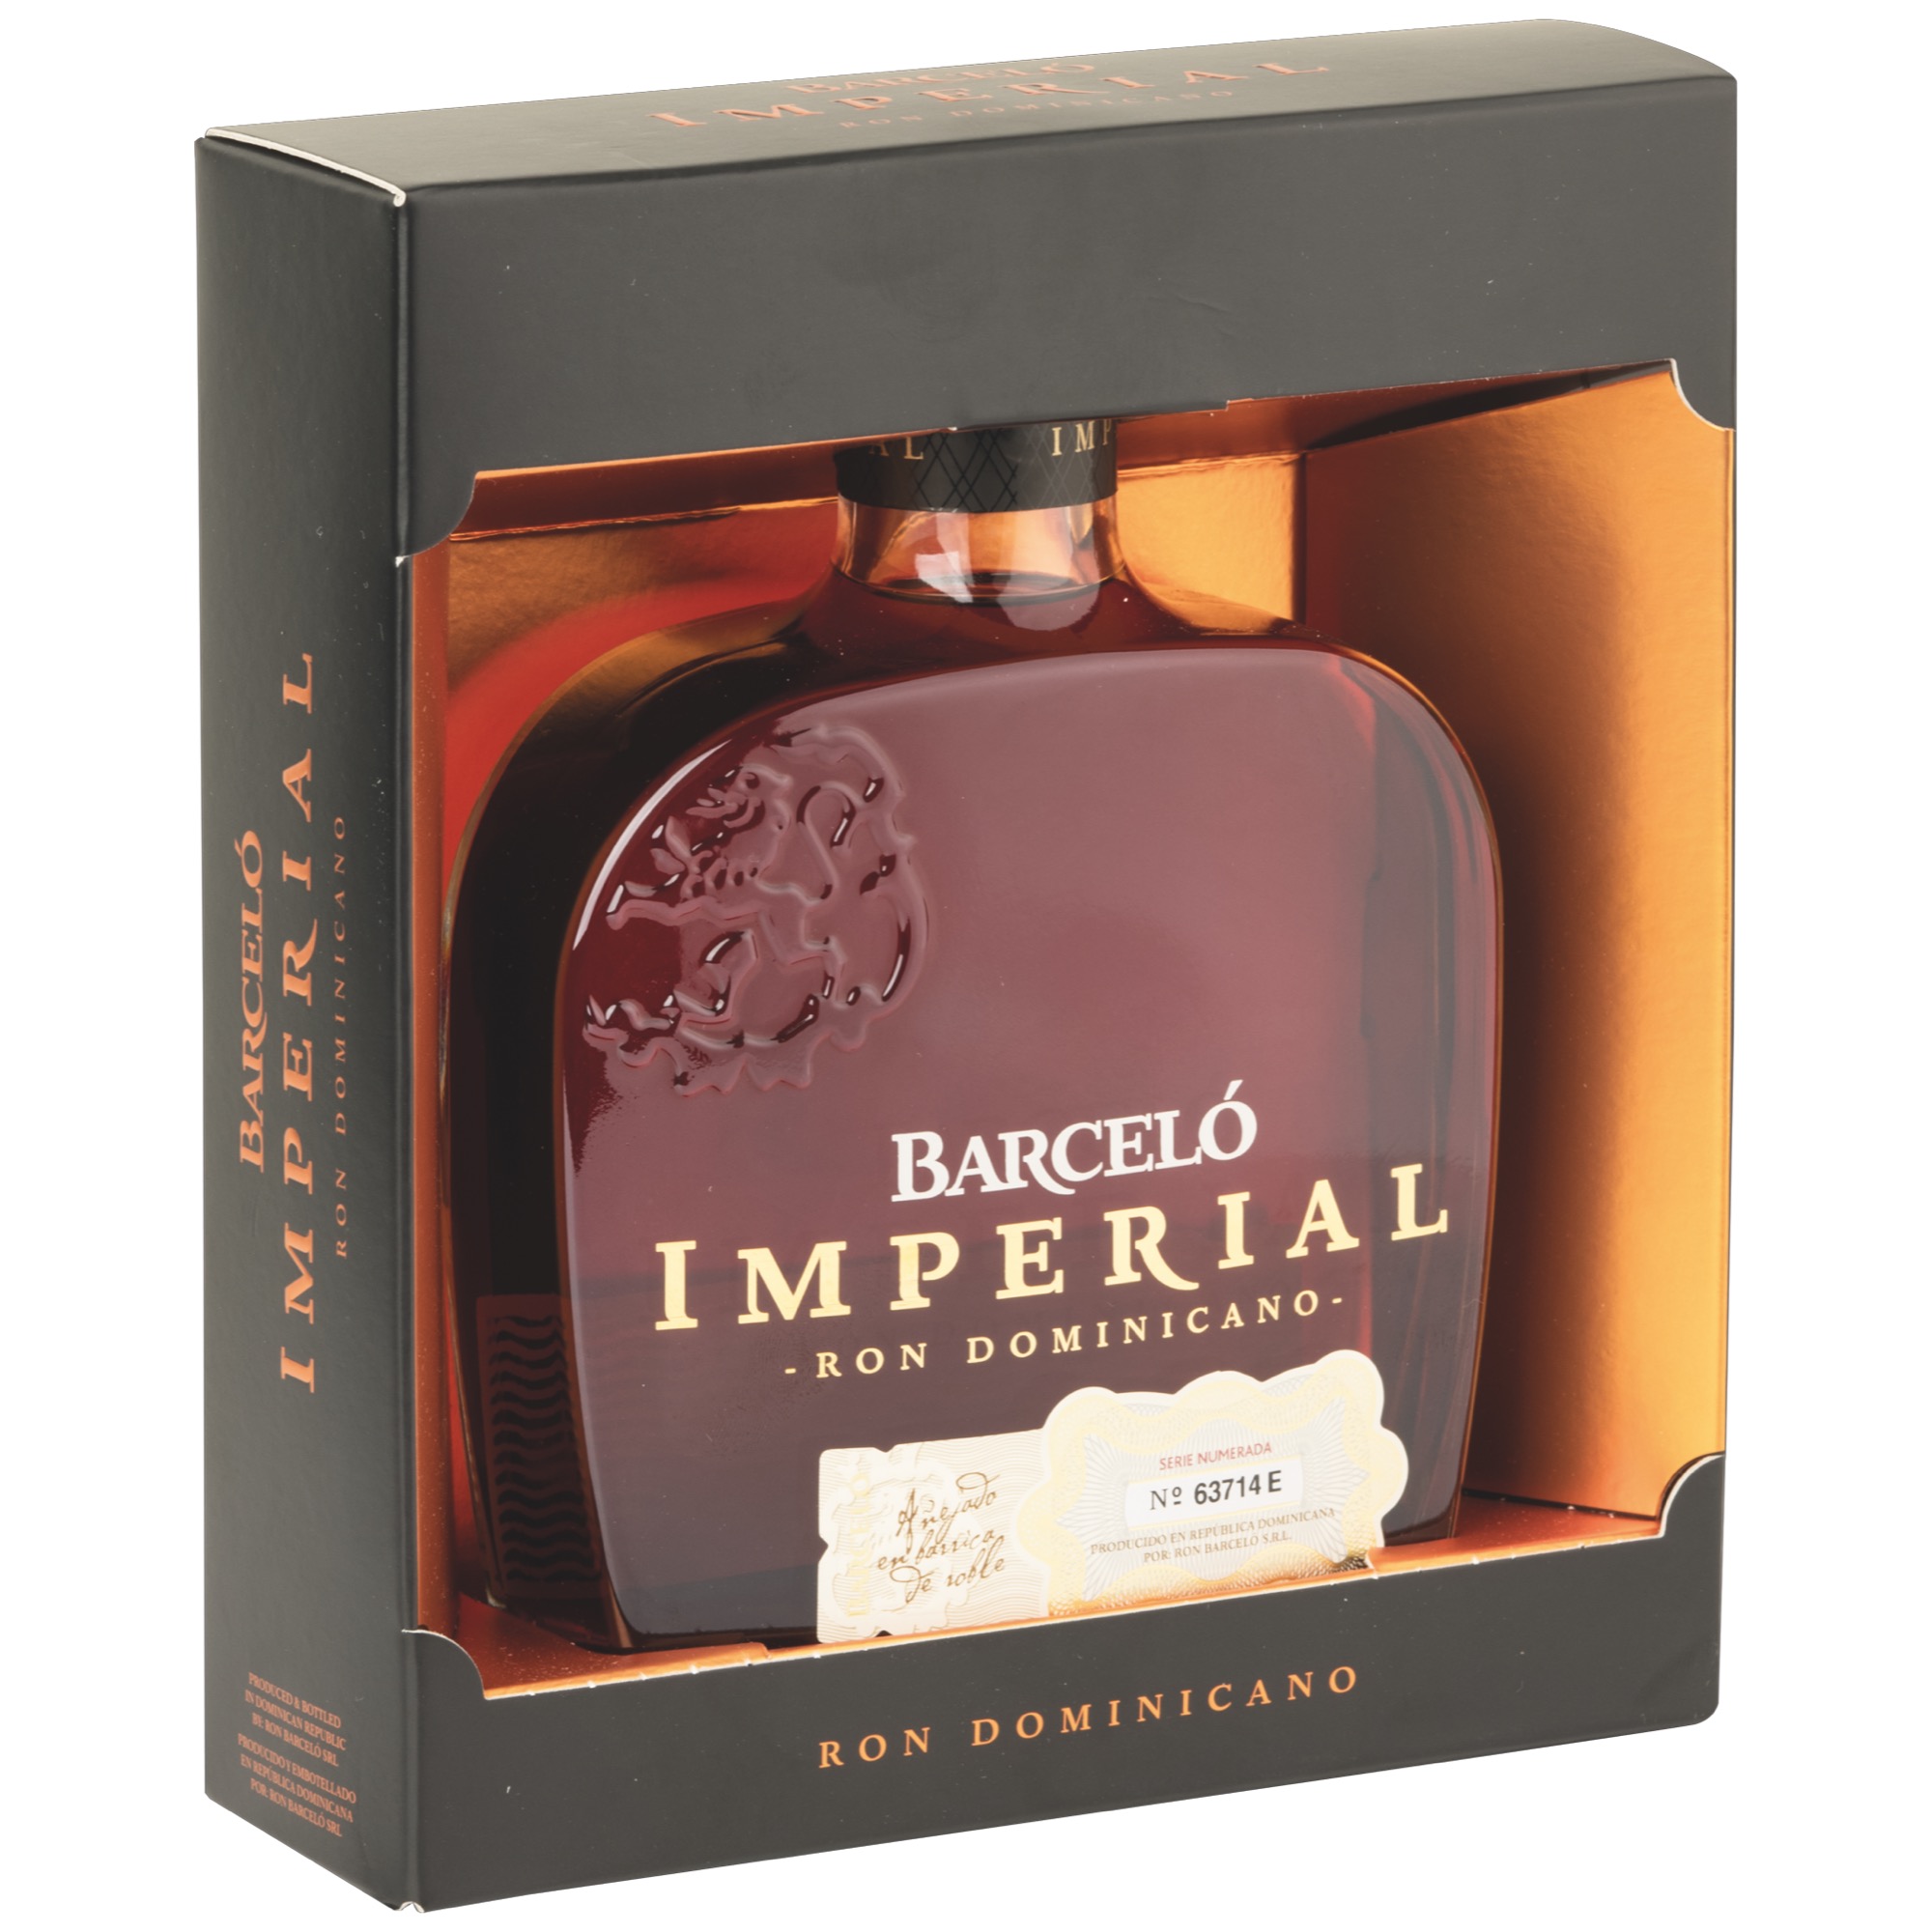 Ron Barcelo Imperial 0,7l